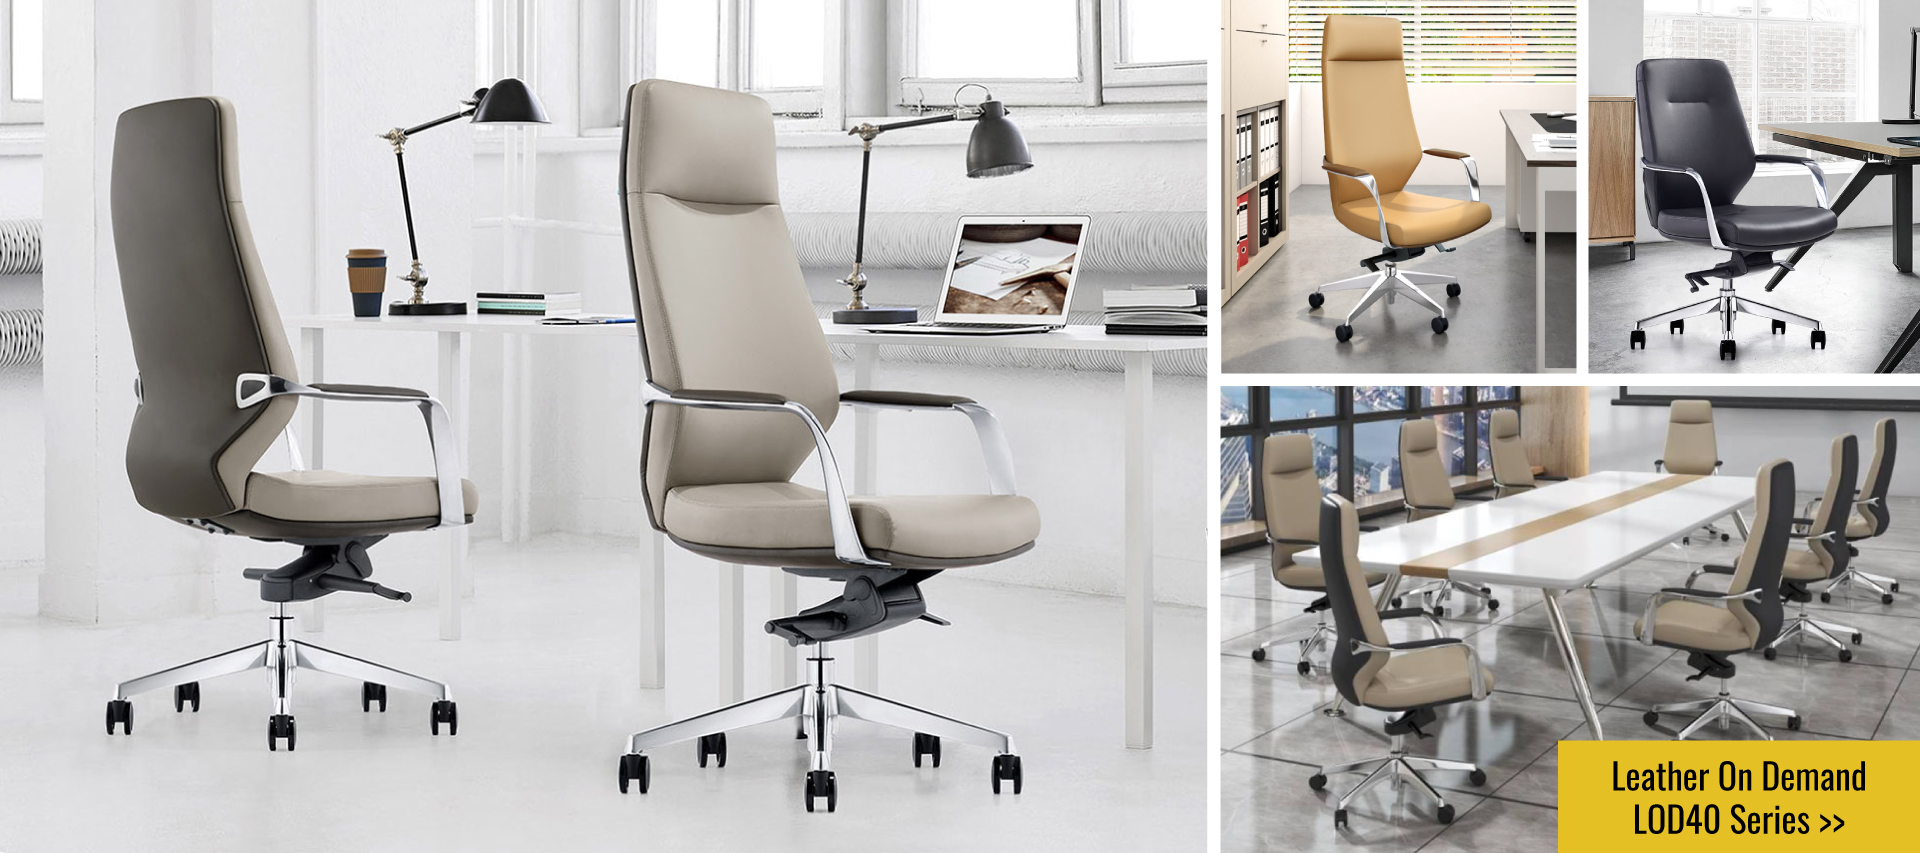 Leather Office Chairs- LOD45 and LOD48